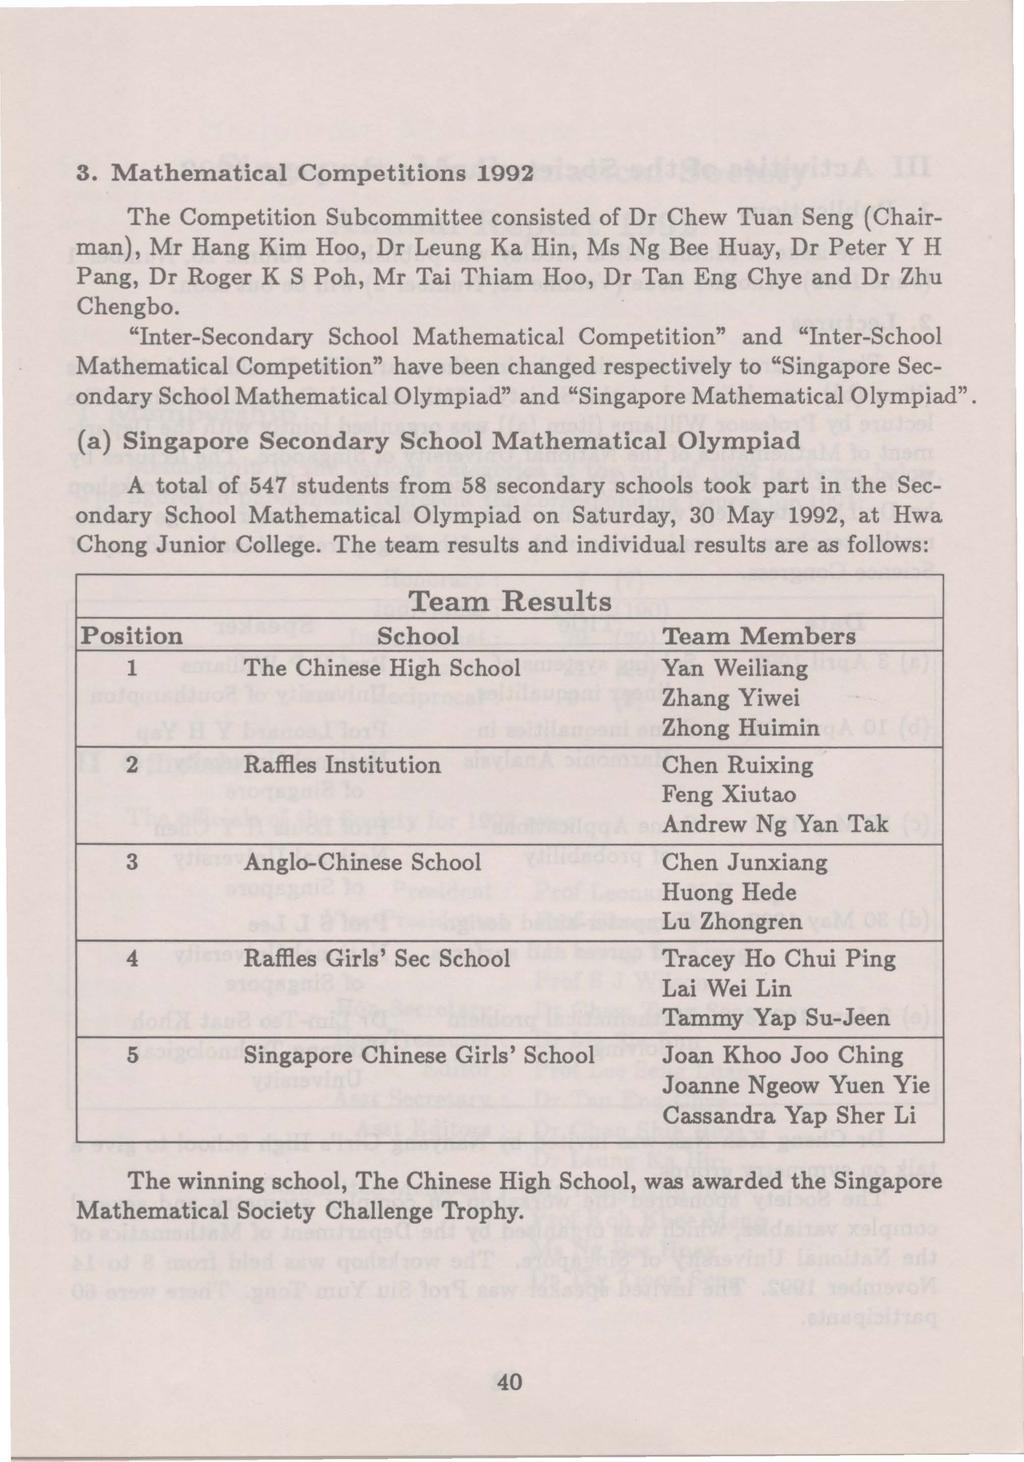 3. Mathematical Competitions 1992 The Competition Subcommittee consisted of Dr Chew Tuan Seng (Chairman), Mr Hang Kim Roo, Dr Leung Ka Hin, Ms Ng Bee Huay, Dr Peter Y H Pang, Dr Roger K S Poh, Mr Tai